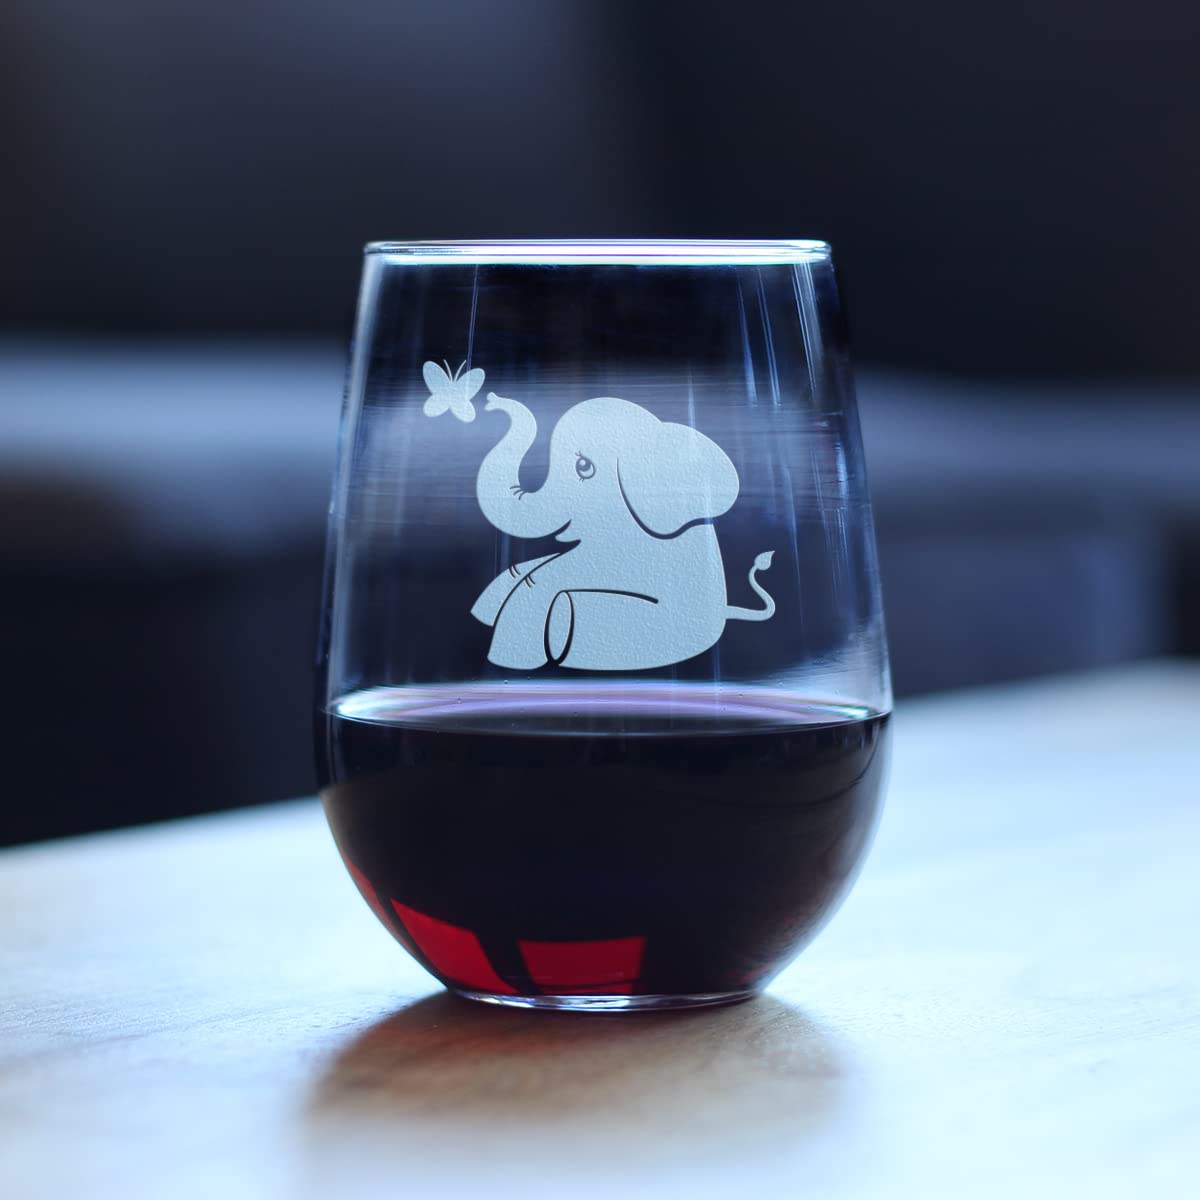 Cute Elephant Stemless Wine Glass - Animal Themed Gifts - Fun Decor with Elephants for Women and Men - Large 17 Oz Glasses